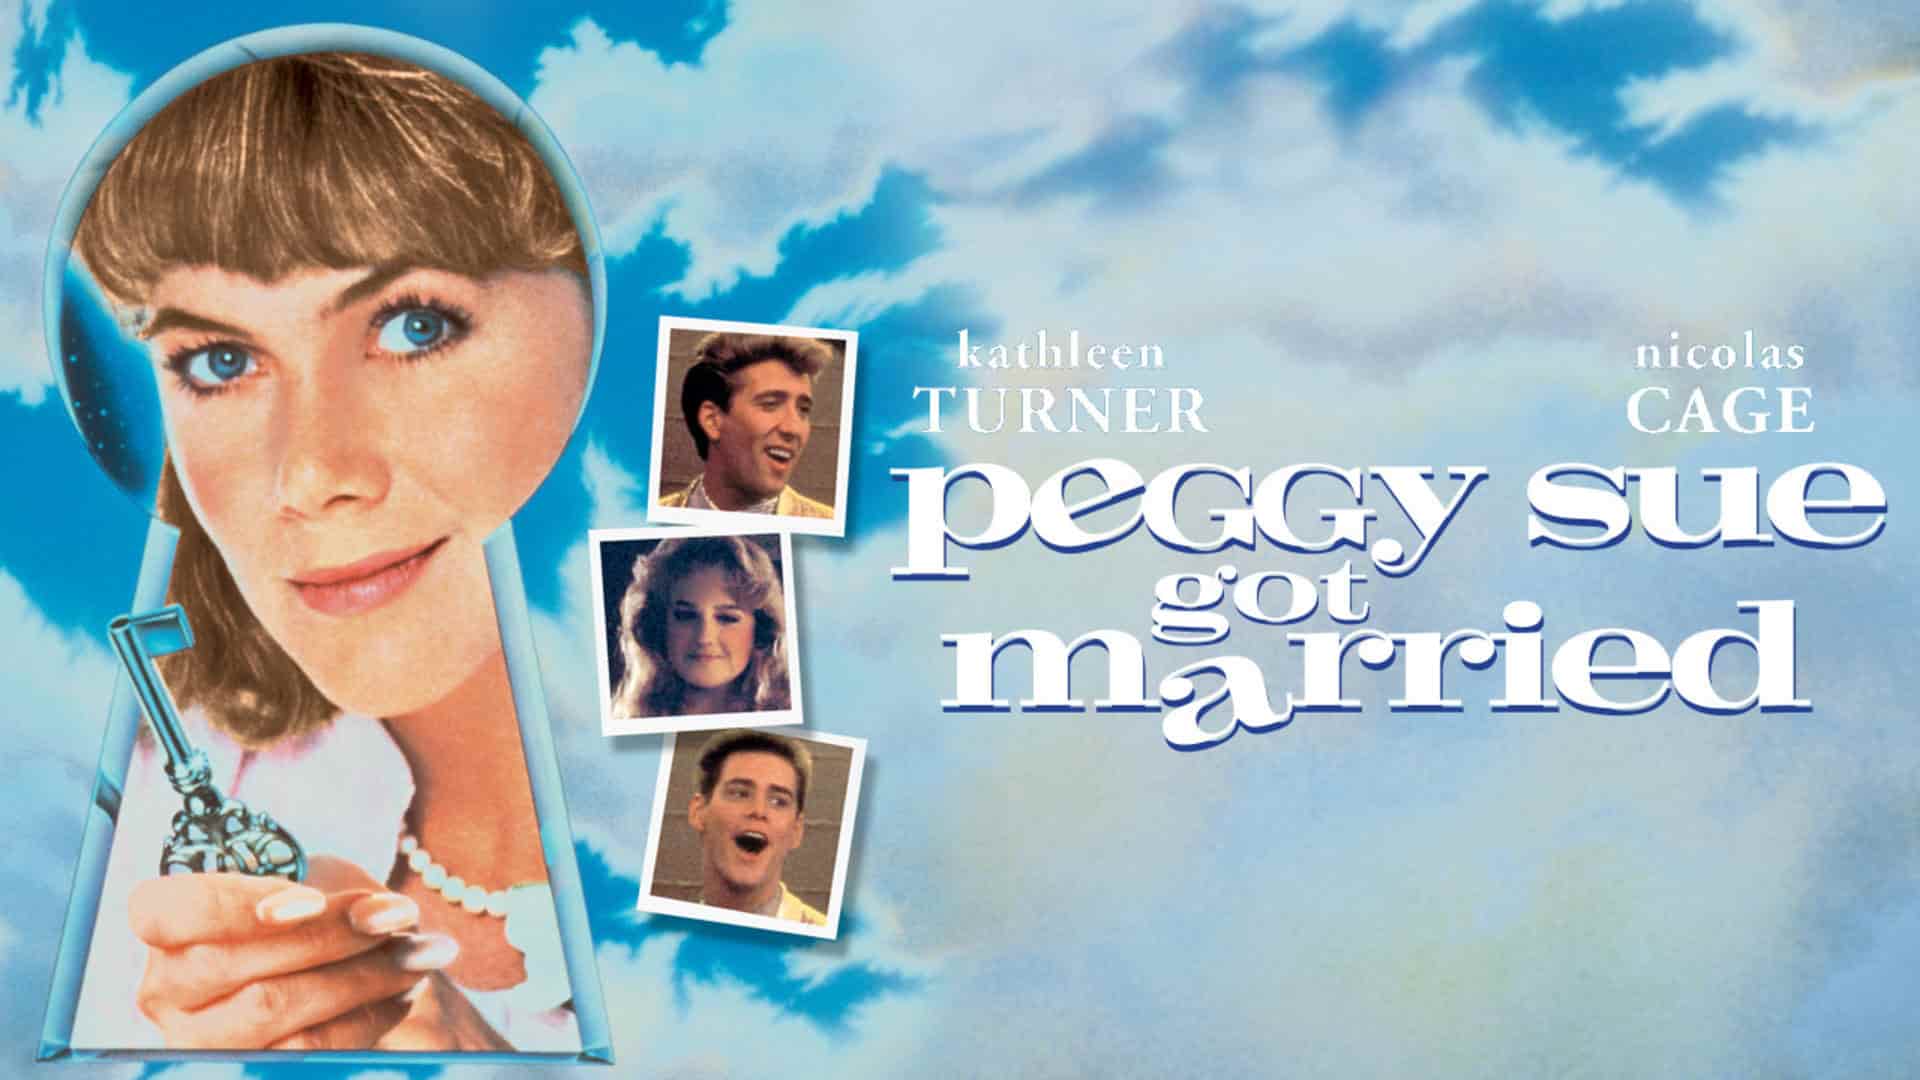 Title art for the time travel movie Peggy Sue Got Married